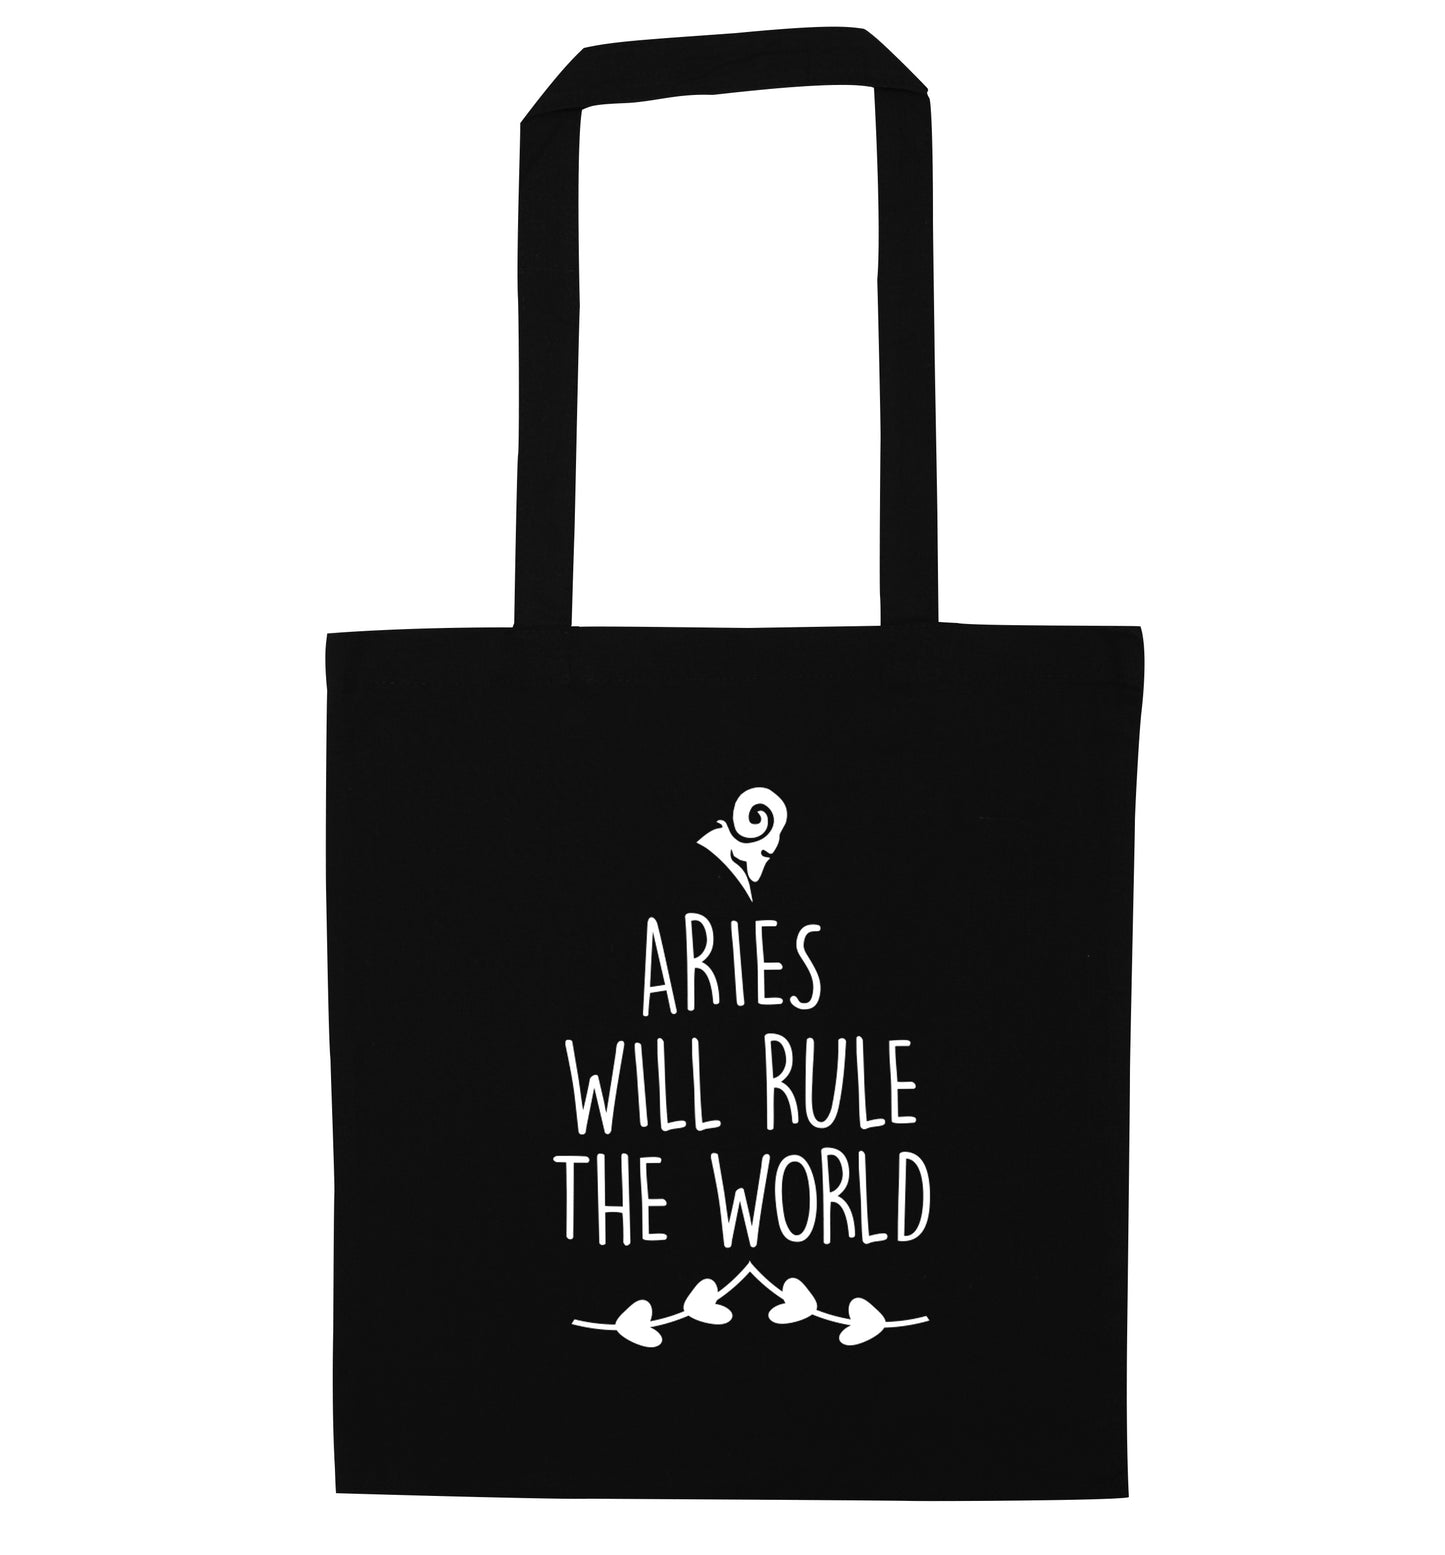 Aries will rule the world black tote bag